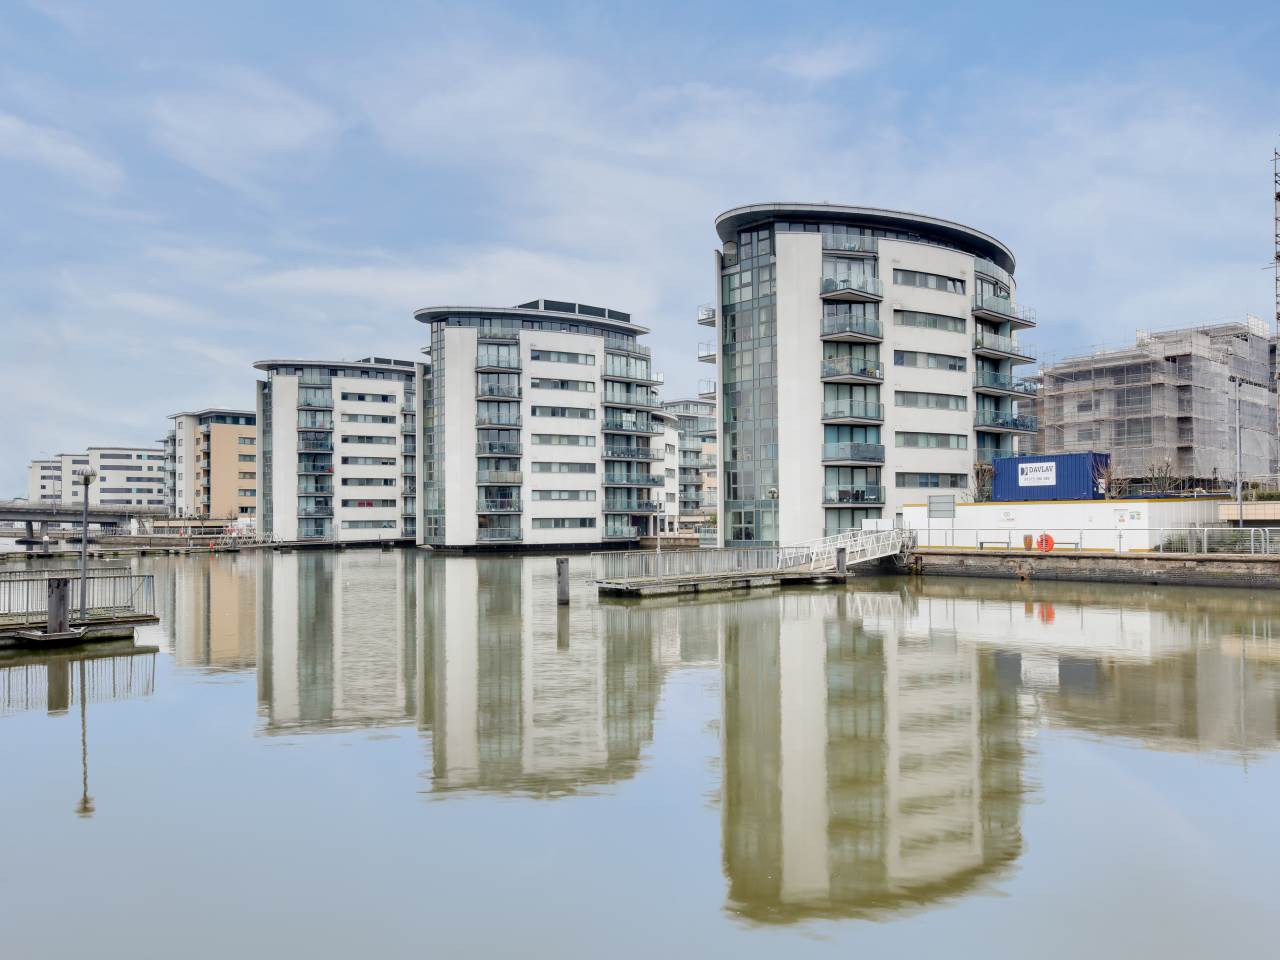 As the seller’s sole agents we are instructed to offer For Sale this well presented third floor apartment located in a sought after block within a waterfront development. Accommodation offers two bedrooms with an en-suite shower room to the master bedroom, a spacious lounge with access to the private balcony which in turn offers a beautiful side view of the river, a well equipped fitted kitchen with integrated appliances and a family bathroom. This property comes with the added benefit of an allocated underground parking space which is valued at between £10,000-£15,000. This property is priced at £350,000 for cash buyers only as the building does not have a valid External Wall Survey Certificate (EWS1). With a valid EWS1 certificate we would expect this apartment to be marketed with an asking price in the region of £425,000. Funding has been secured for the initial remedial works and the management company have applied for further funding which they are waiting to hear back on. The property is currently let on an AST generating £1400 per calendar month but can be offered with full vacant possession.Buyers are advised to make their own inquiries with the block managing agents and ultimately must satisfy themselves as to the funding position for the required remedial works. Buyers are also advised to take legal advice before committing to purchase.
